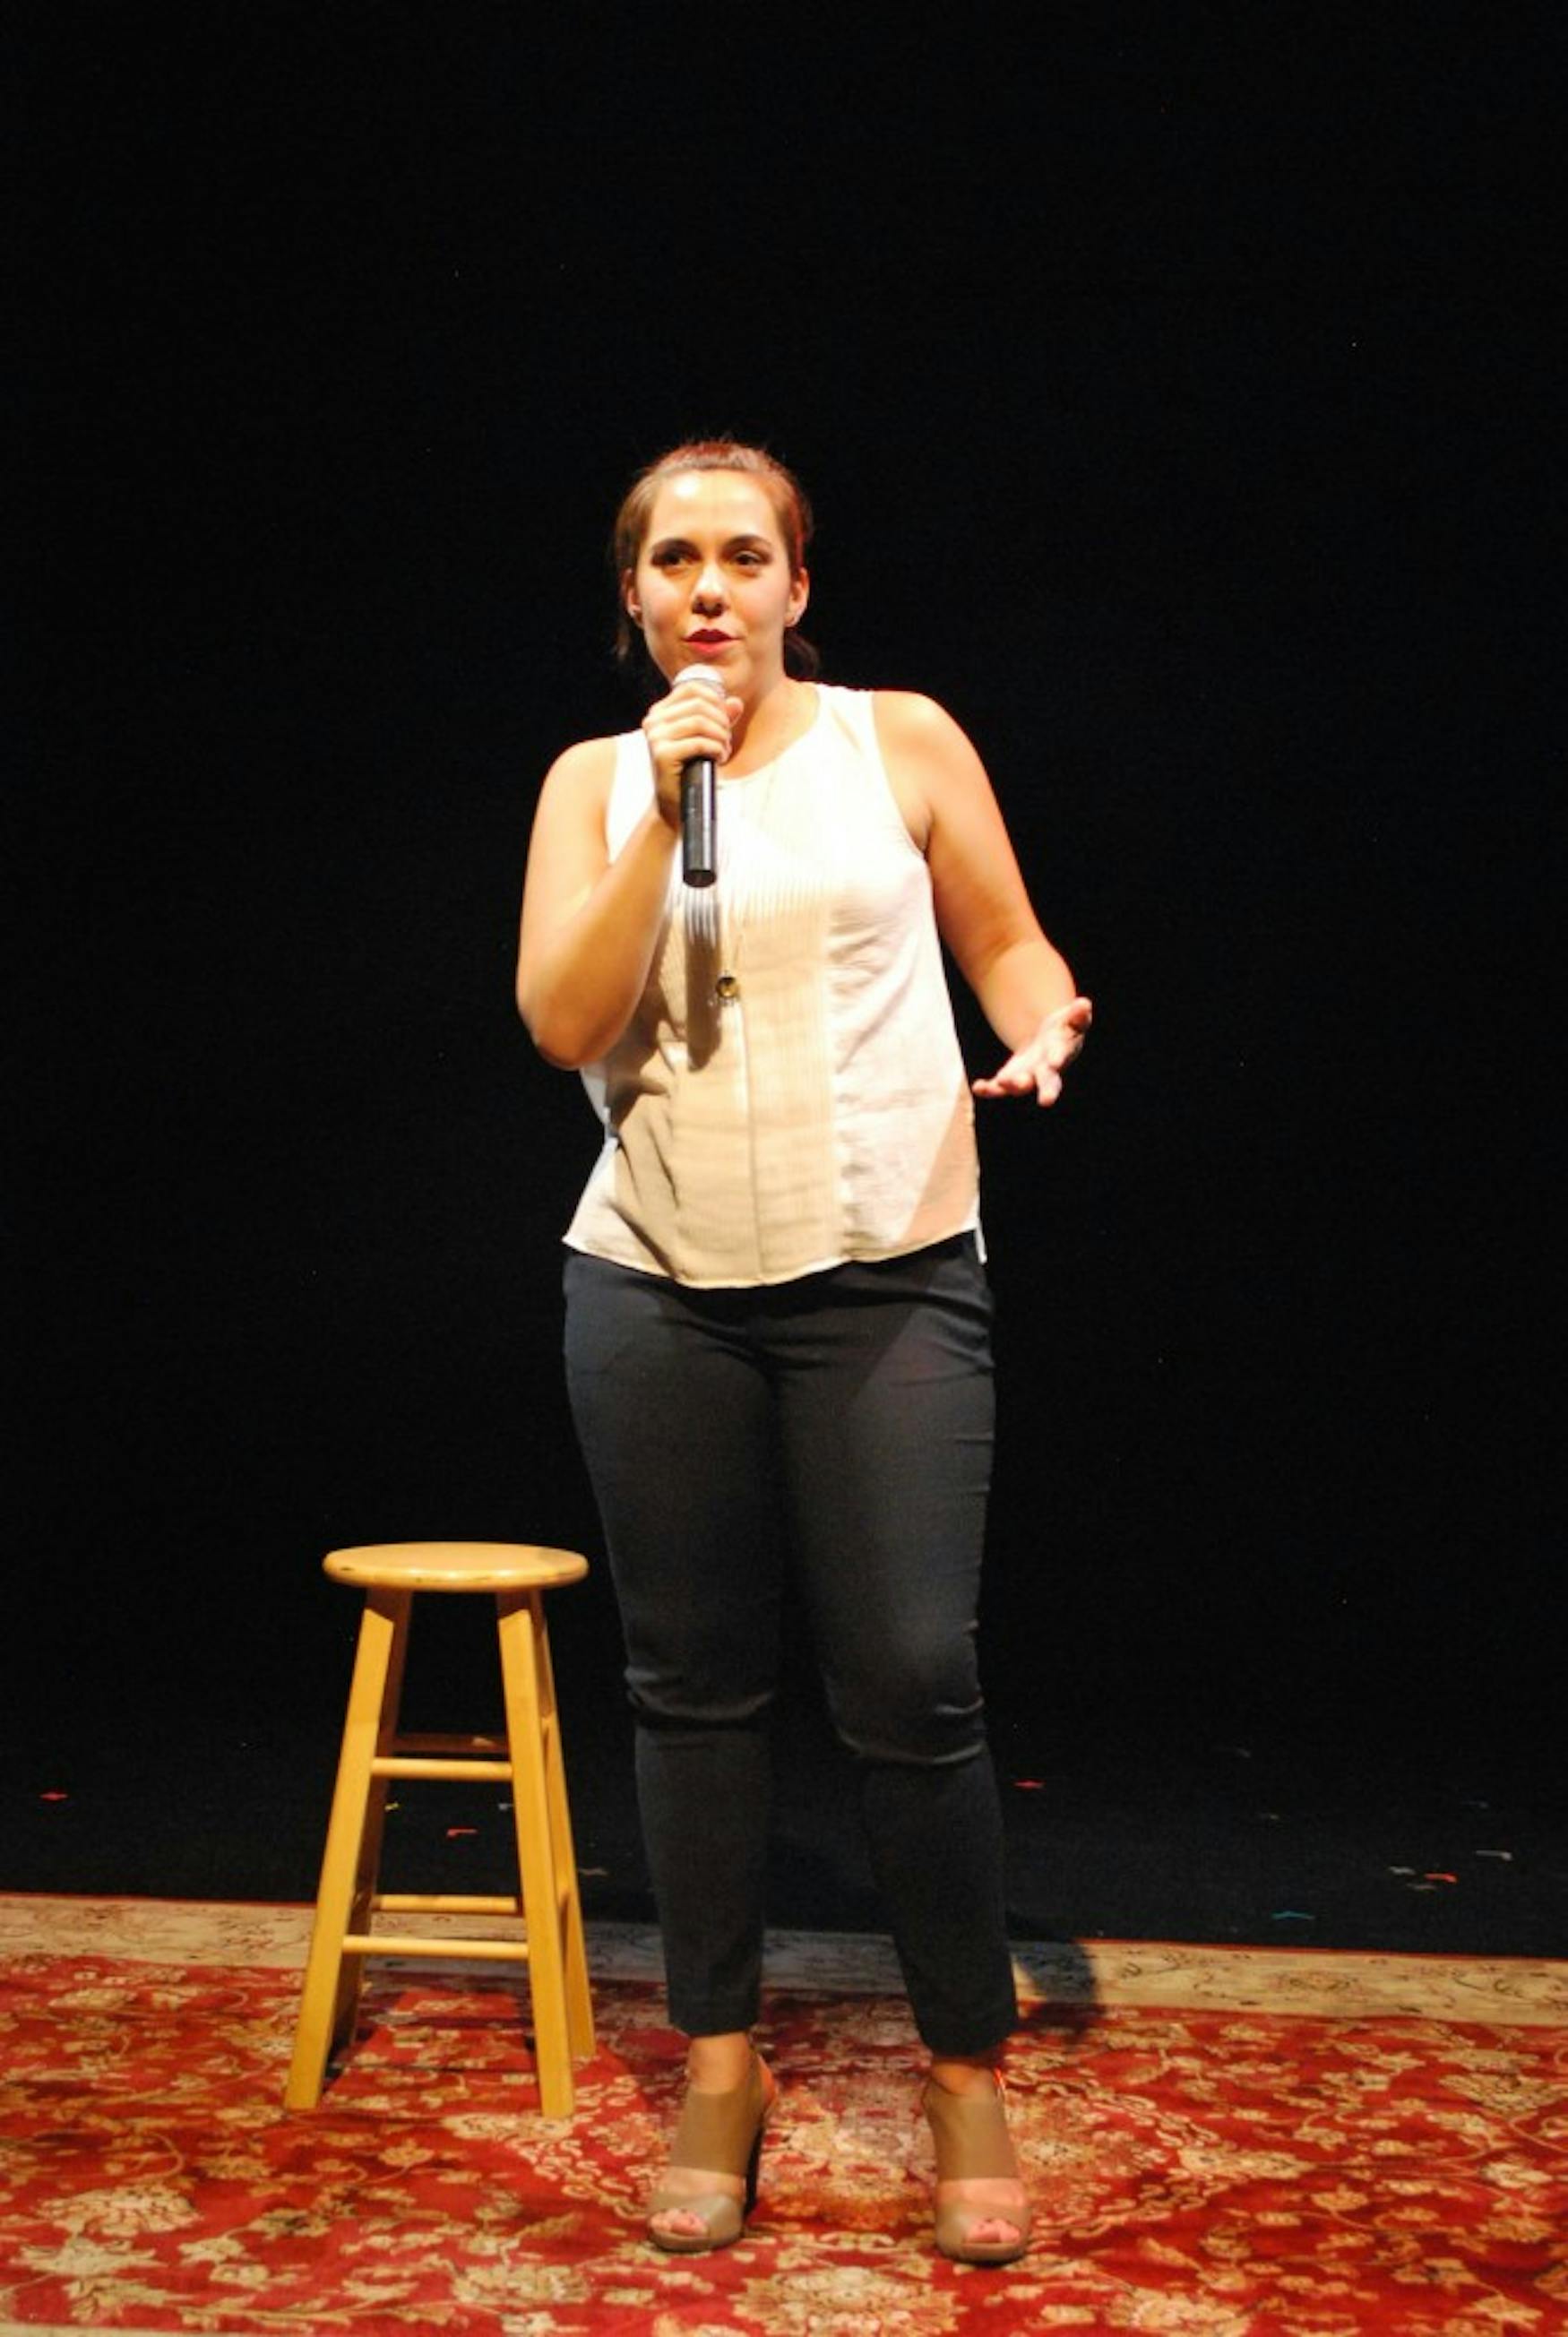 NOT ABOUT THE PRICE TAG: Chmiel’s stand-up show referenced her costly decision to attempt to pursue comedy after graduating college.